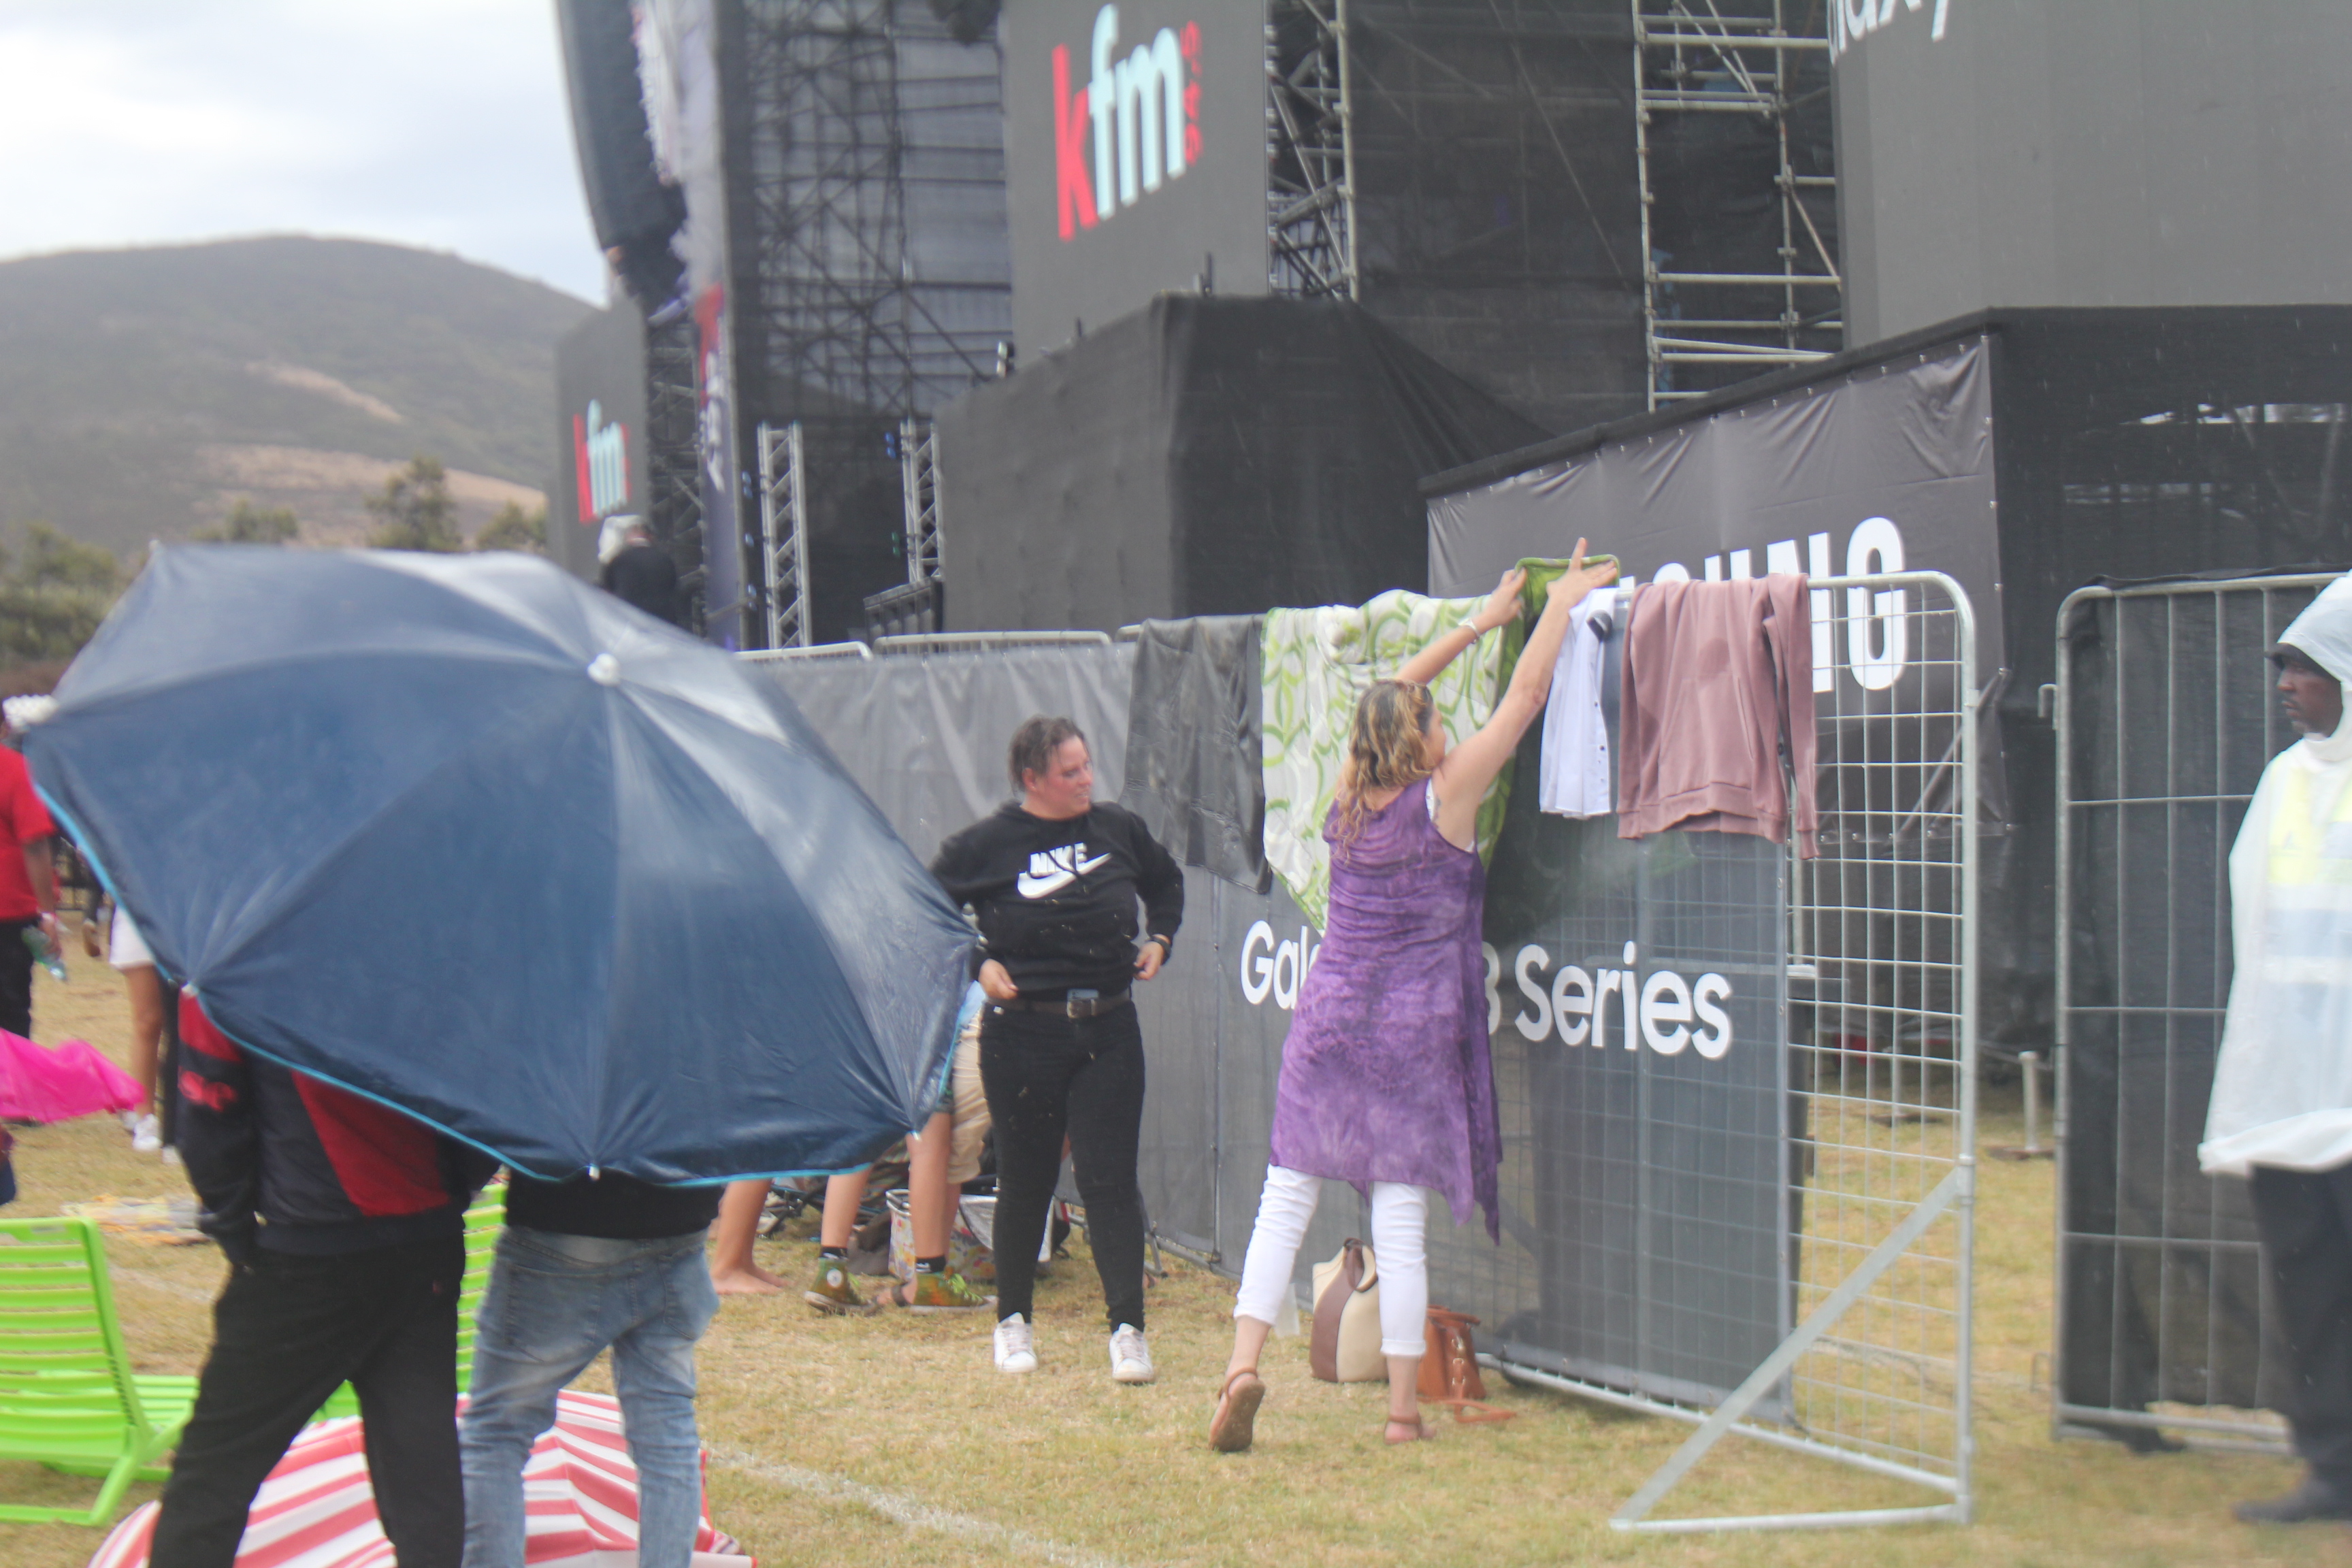 Festival goers hang up picnic blankets and some clothes after rain hit the Galaxy KDay Festival. Image: An Wentzel